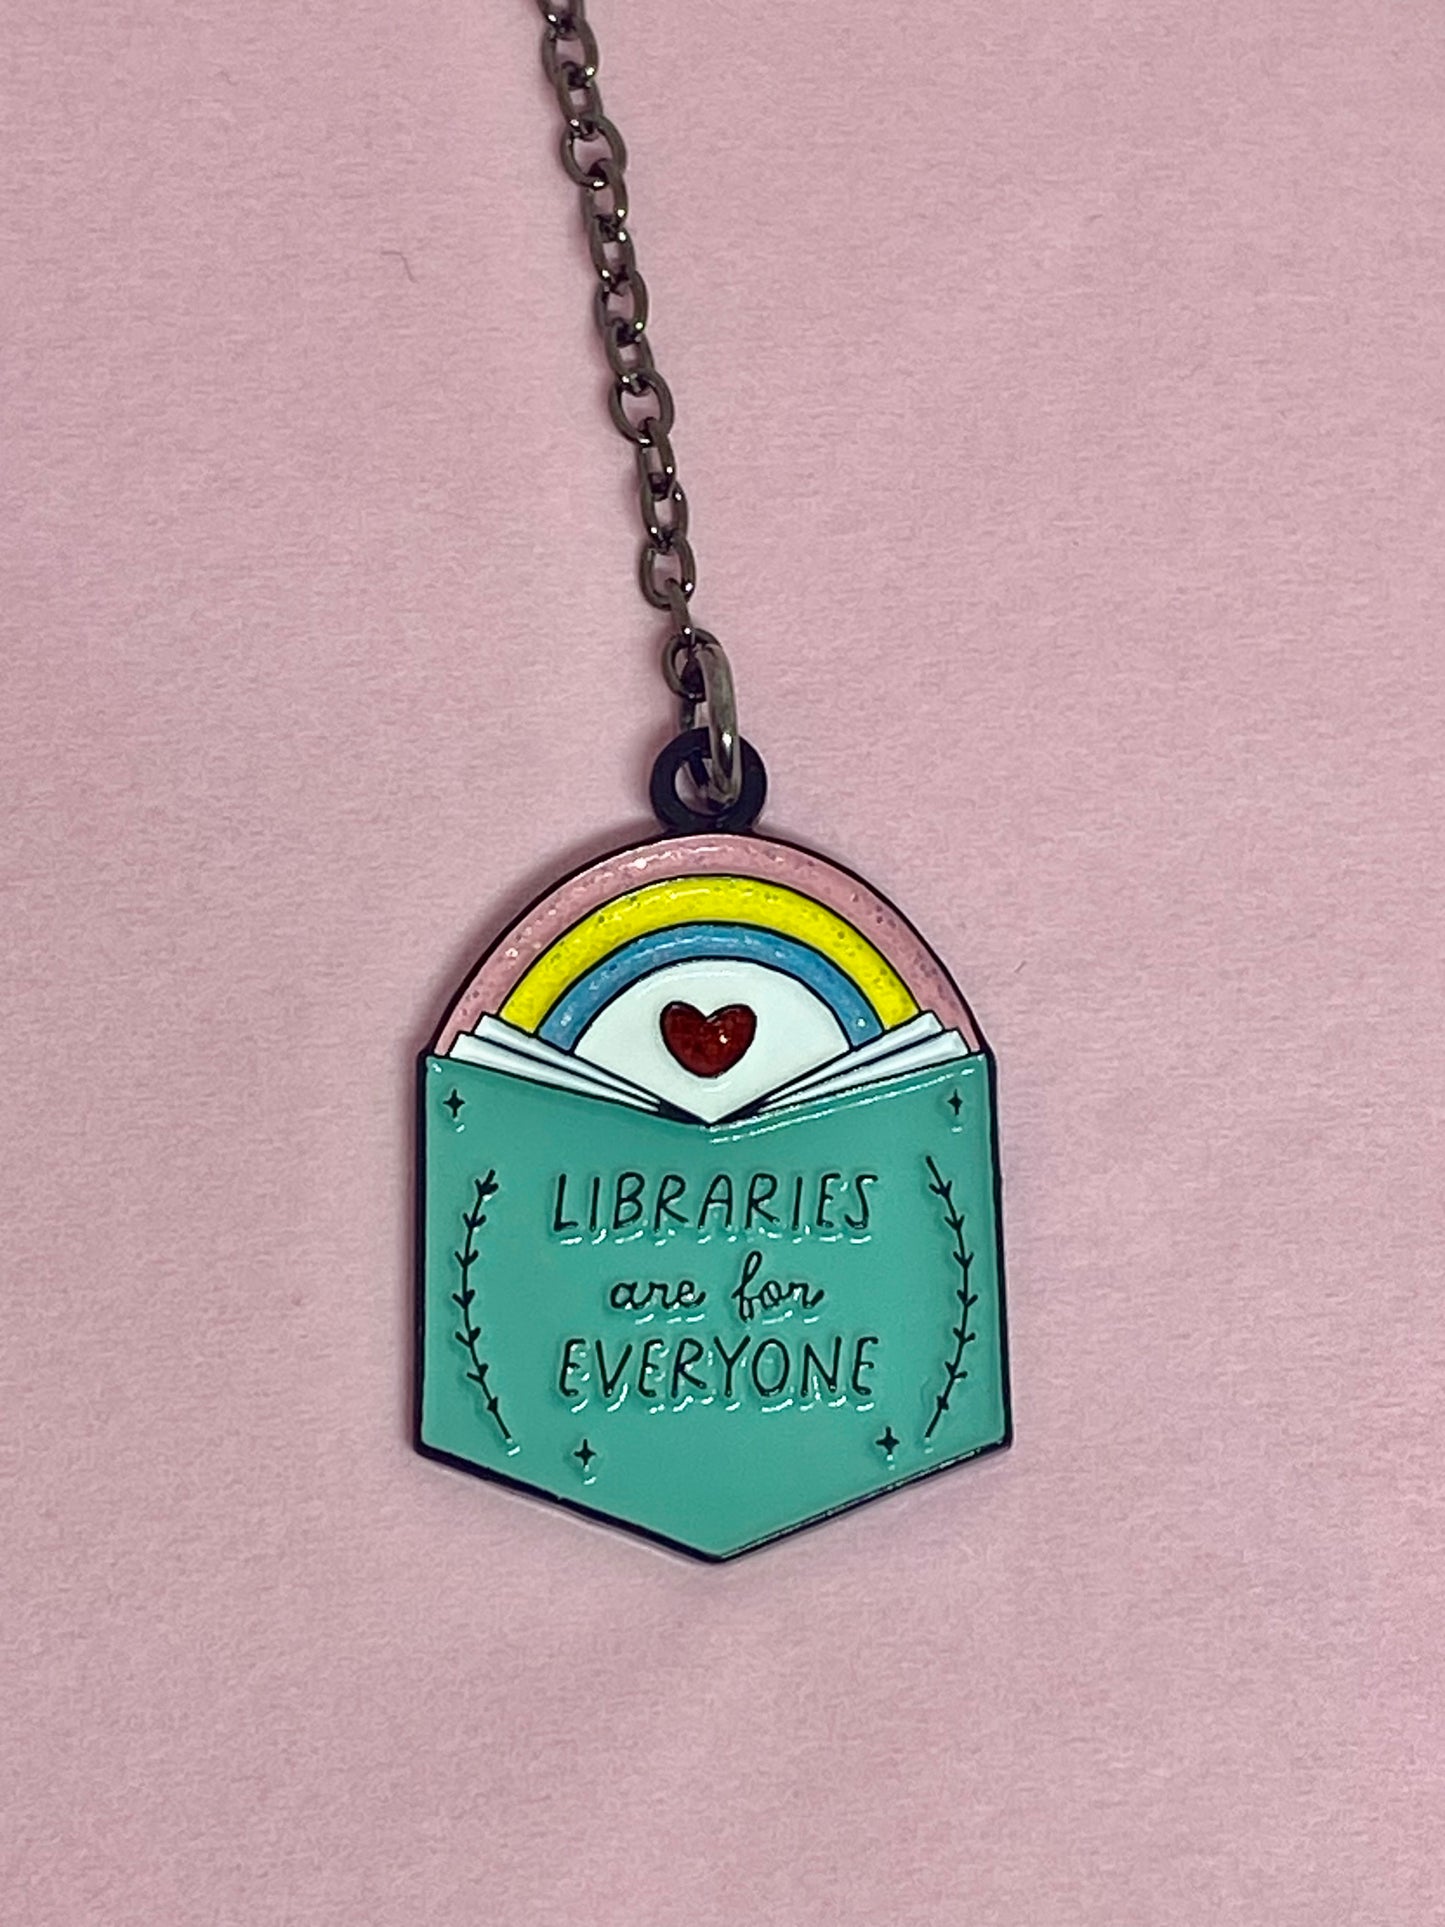 Libraries are for everyone enamel bookmark with chain